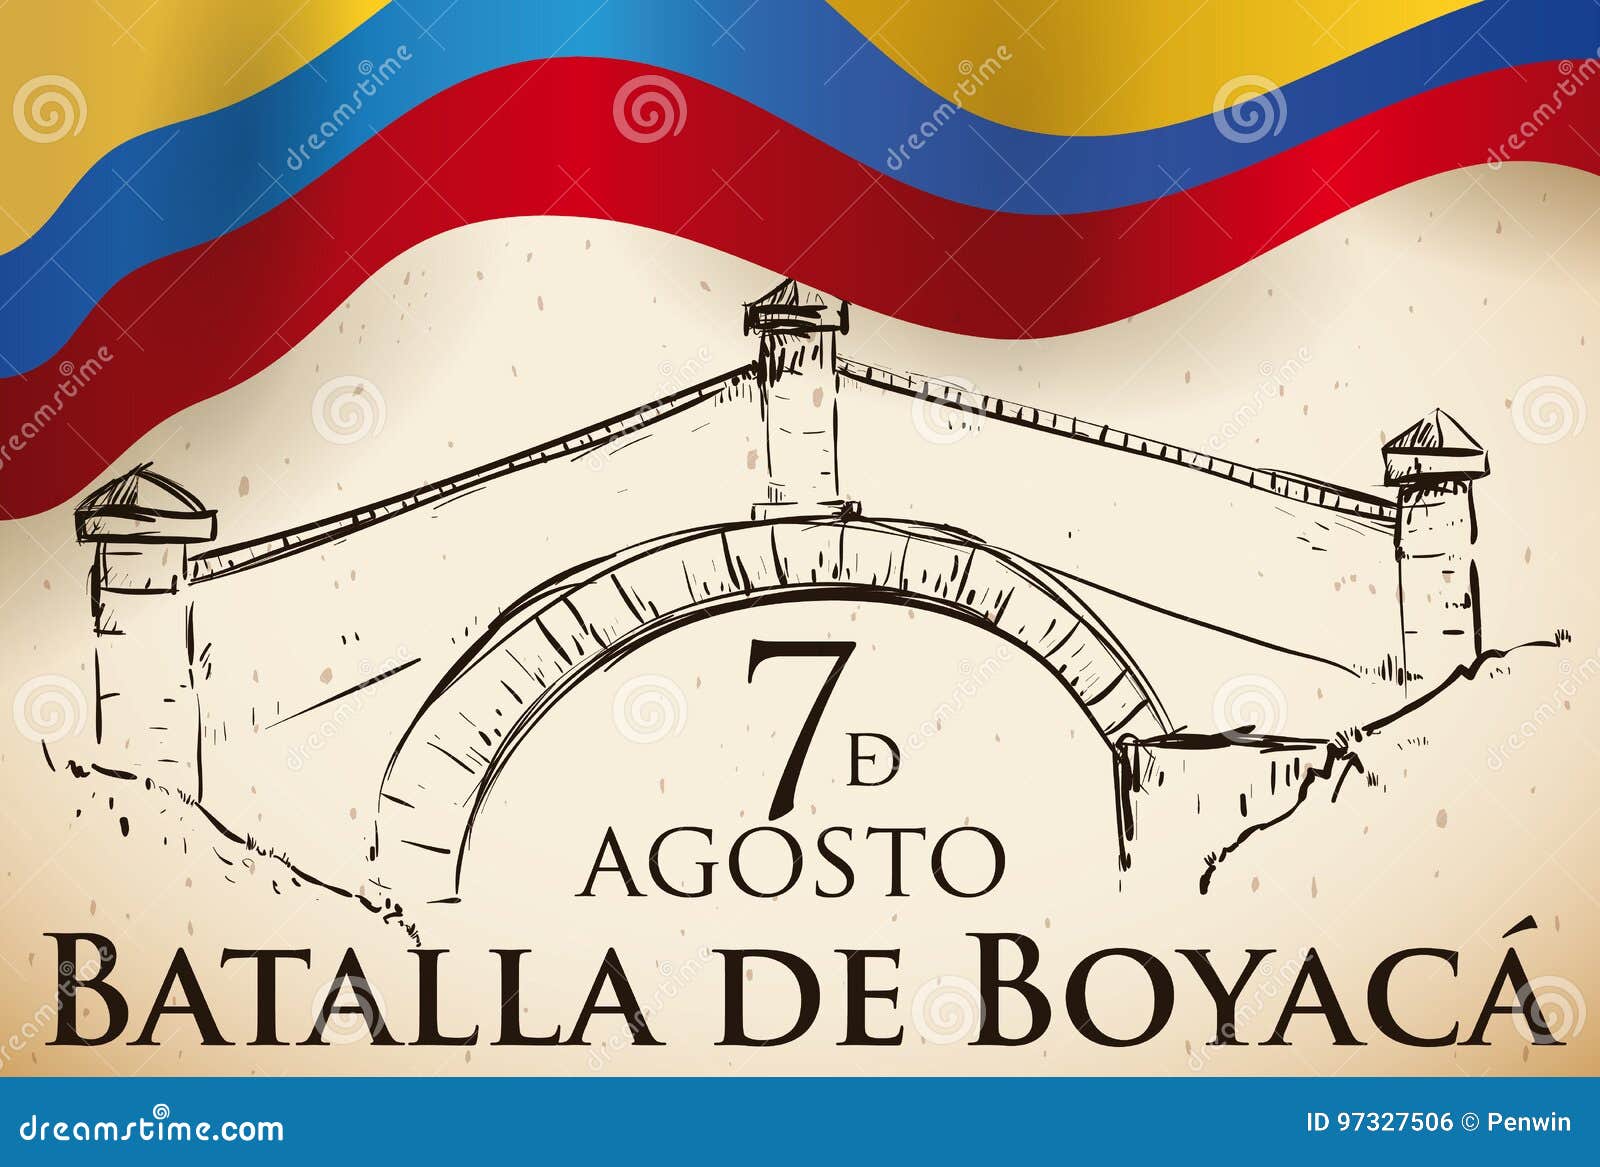 Commemorative Hand Drawn Boyaca Bridge over Scroll and Colombian Flag, Vector Illustration. Poster with flag and traditional Colombian landmark in hand drawn style: the Bridge of Boyaca Commemorating the Battle celebration in August 7 written in Spanish.